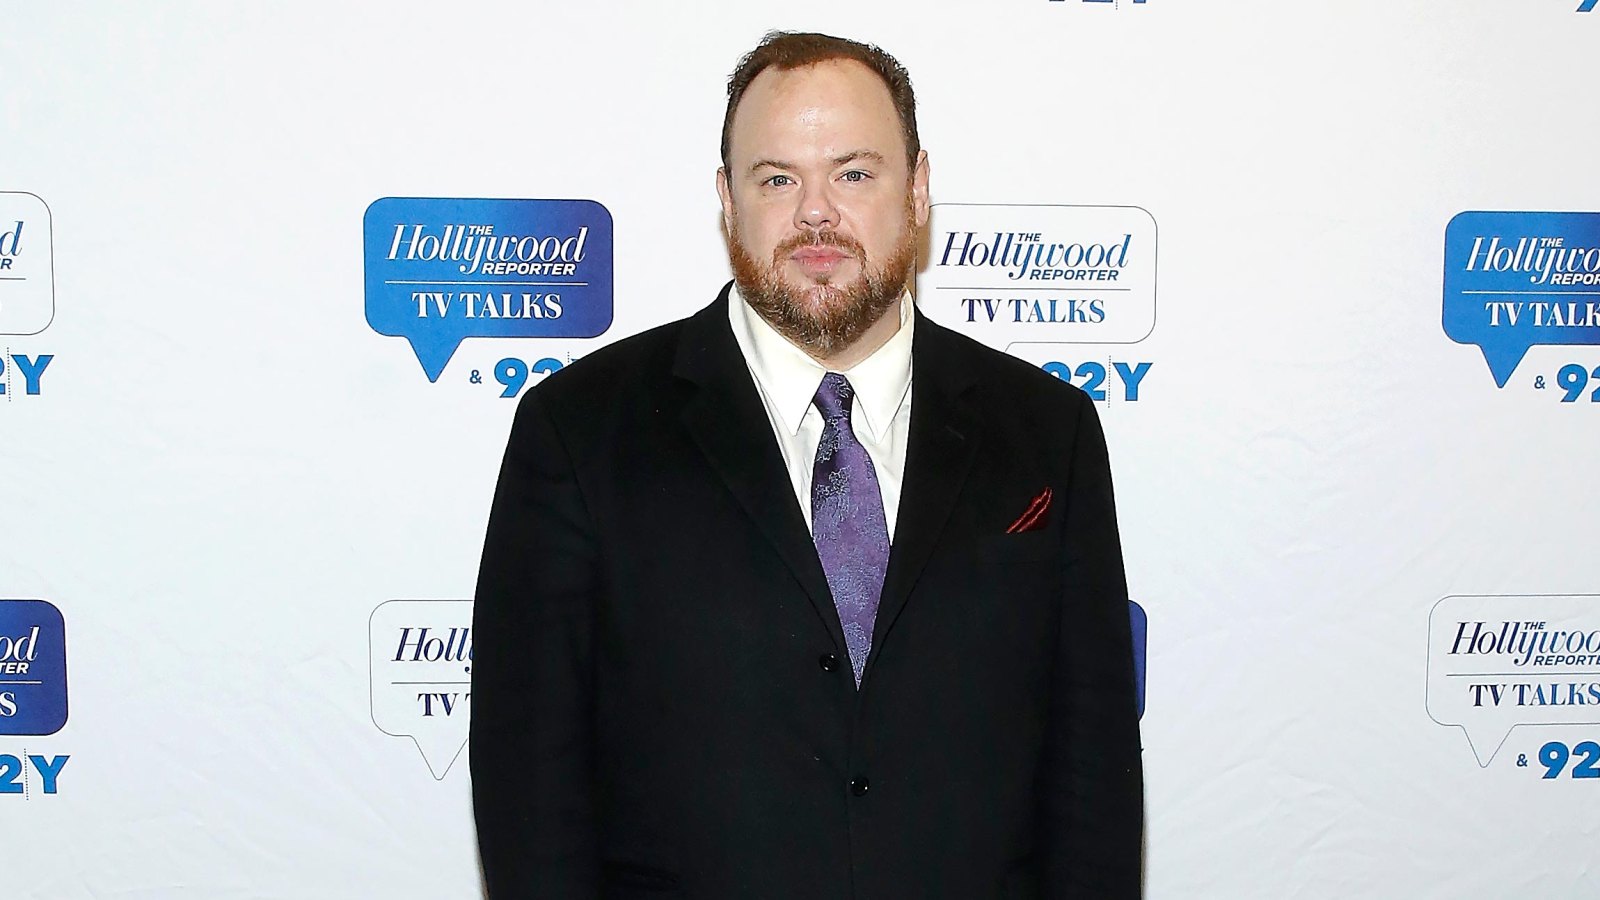 Home Alone Star Devin Ratray Domestic Violence Trial Delayed After Critical Hospitalization